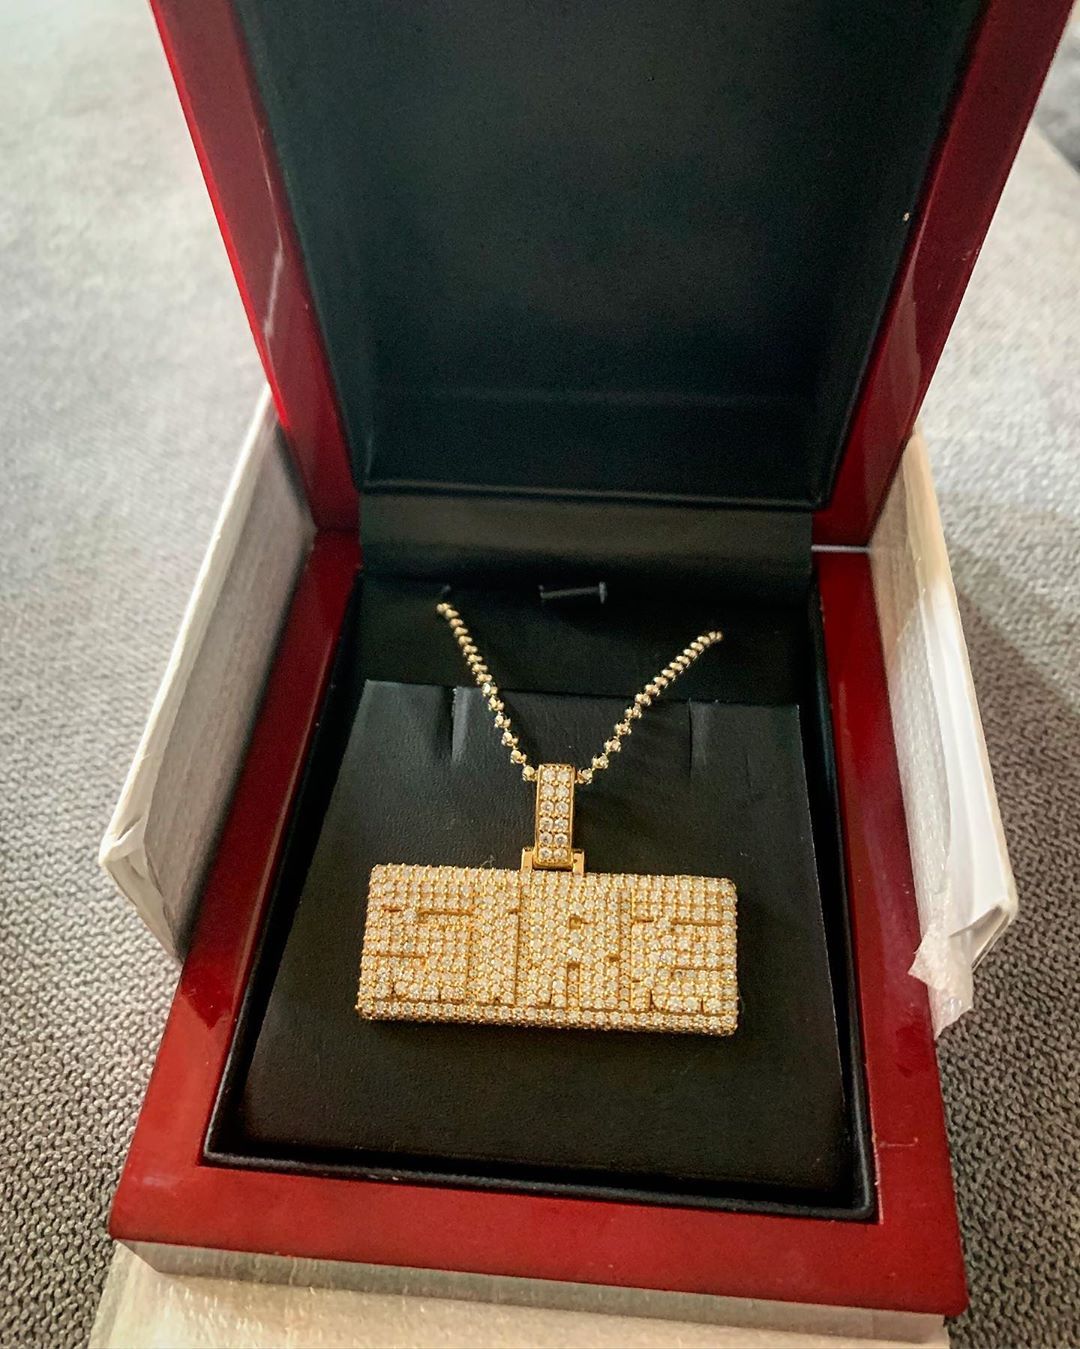 50 Cent Buys A Blinged Out Diamond Chain For His Son S 7th Birthday Present - blinged roblox